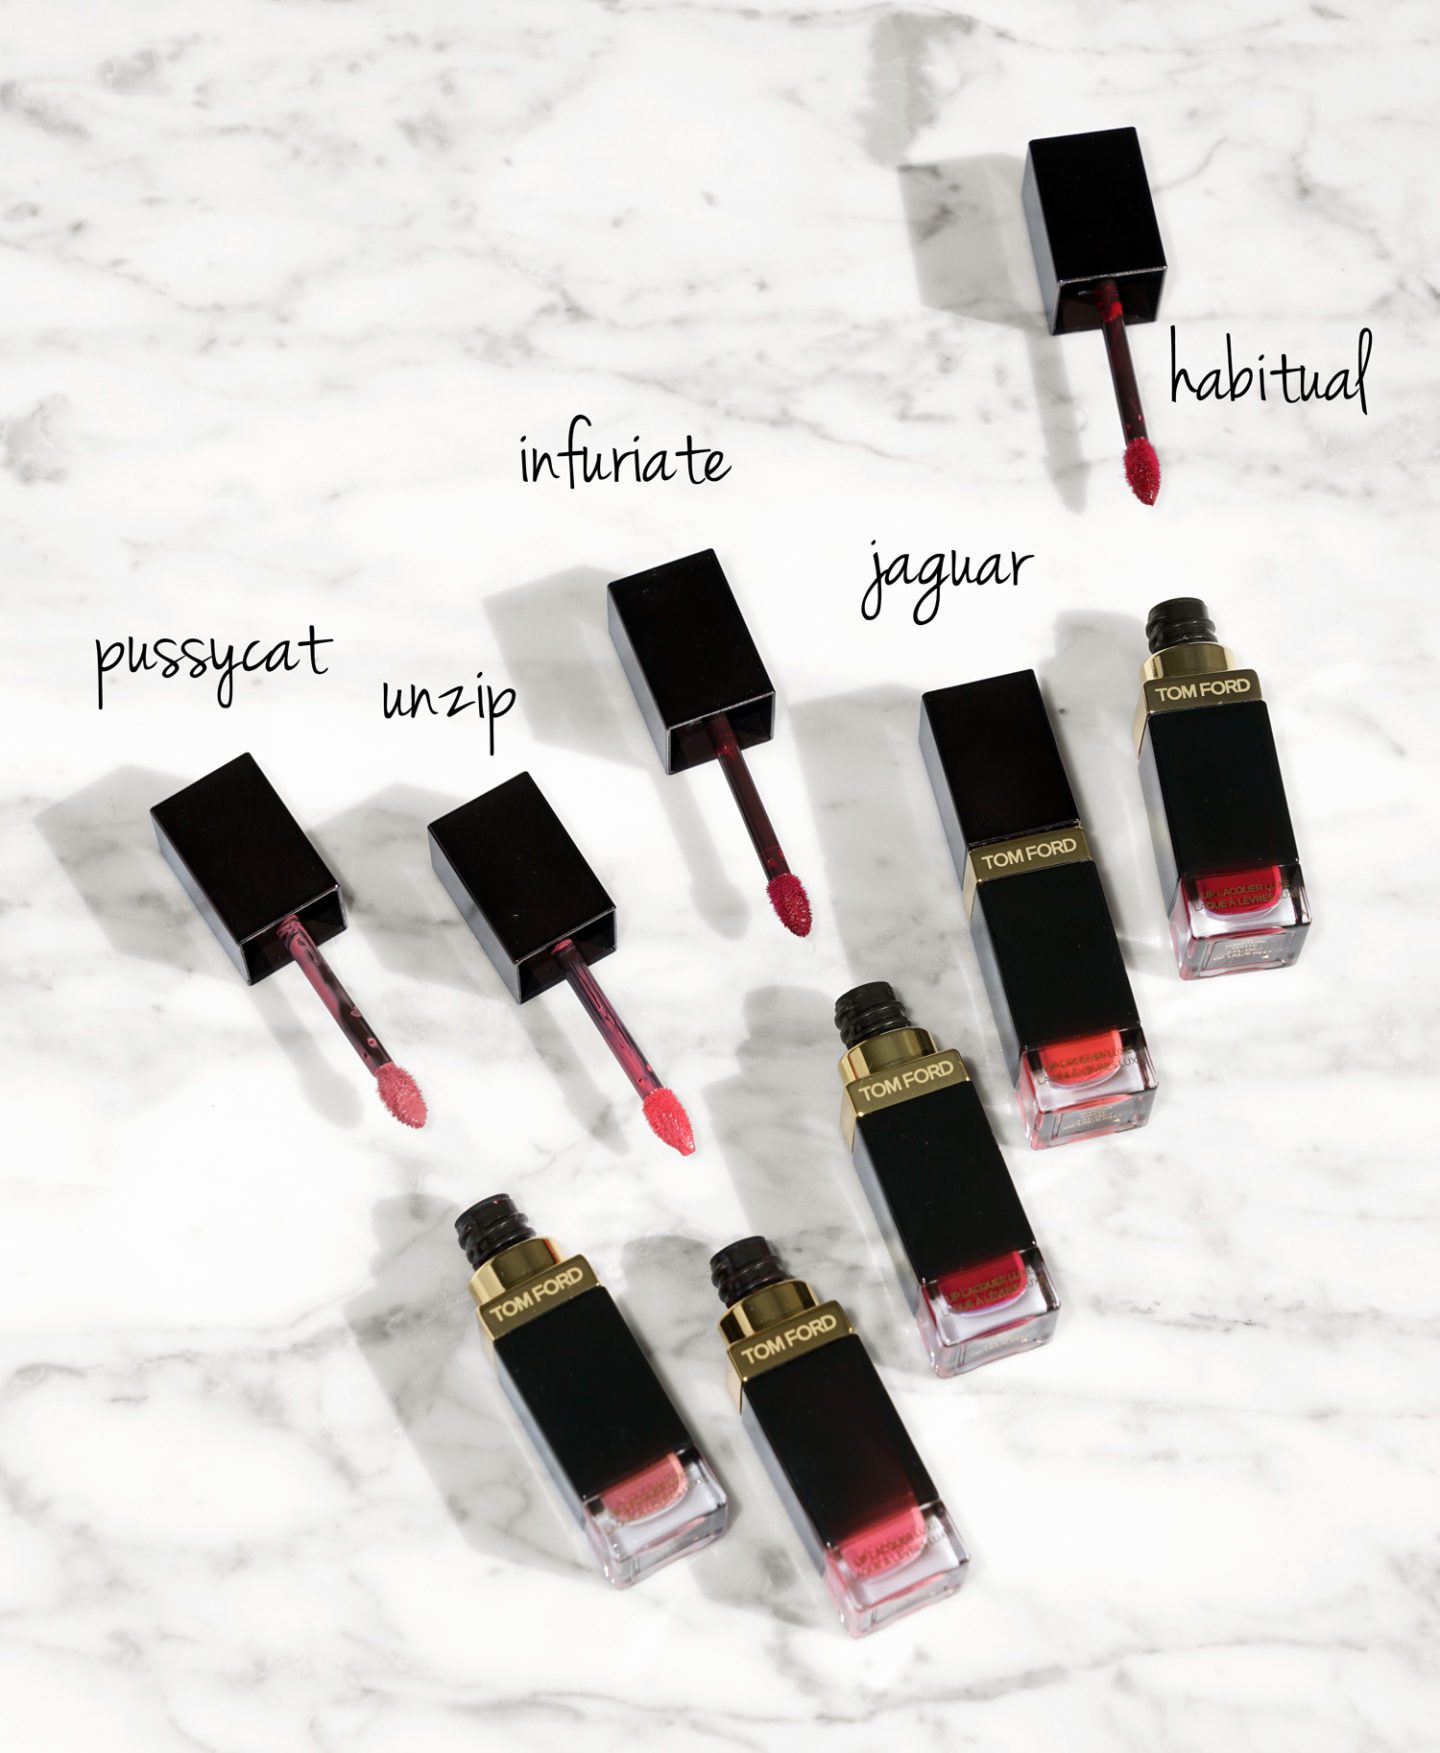 Tom Ford Lip Lacquer Luxe Pussycat, Unzip, Infuriate, Jaguar and Habitual